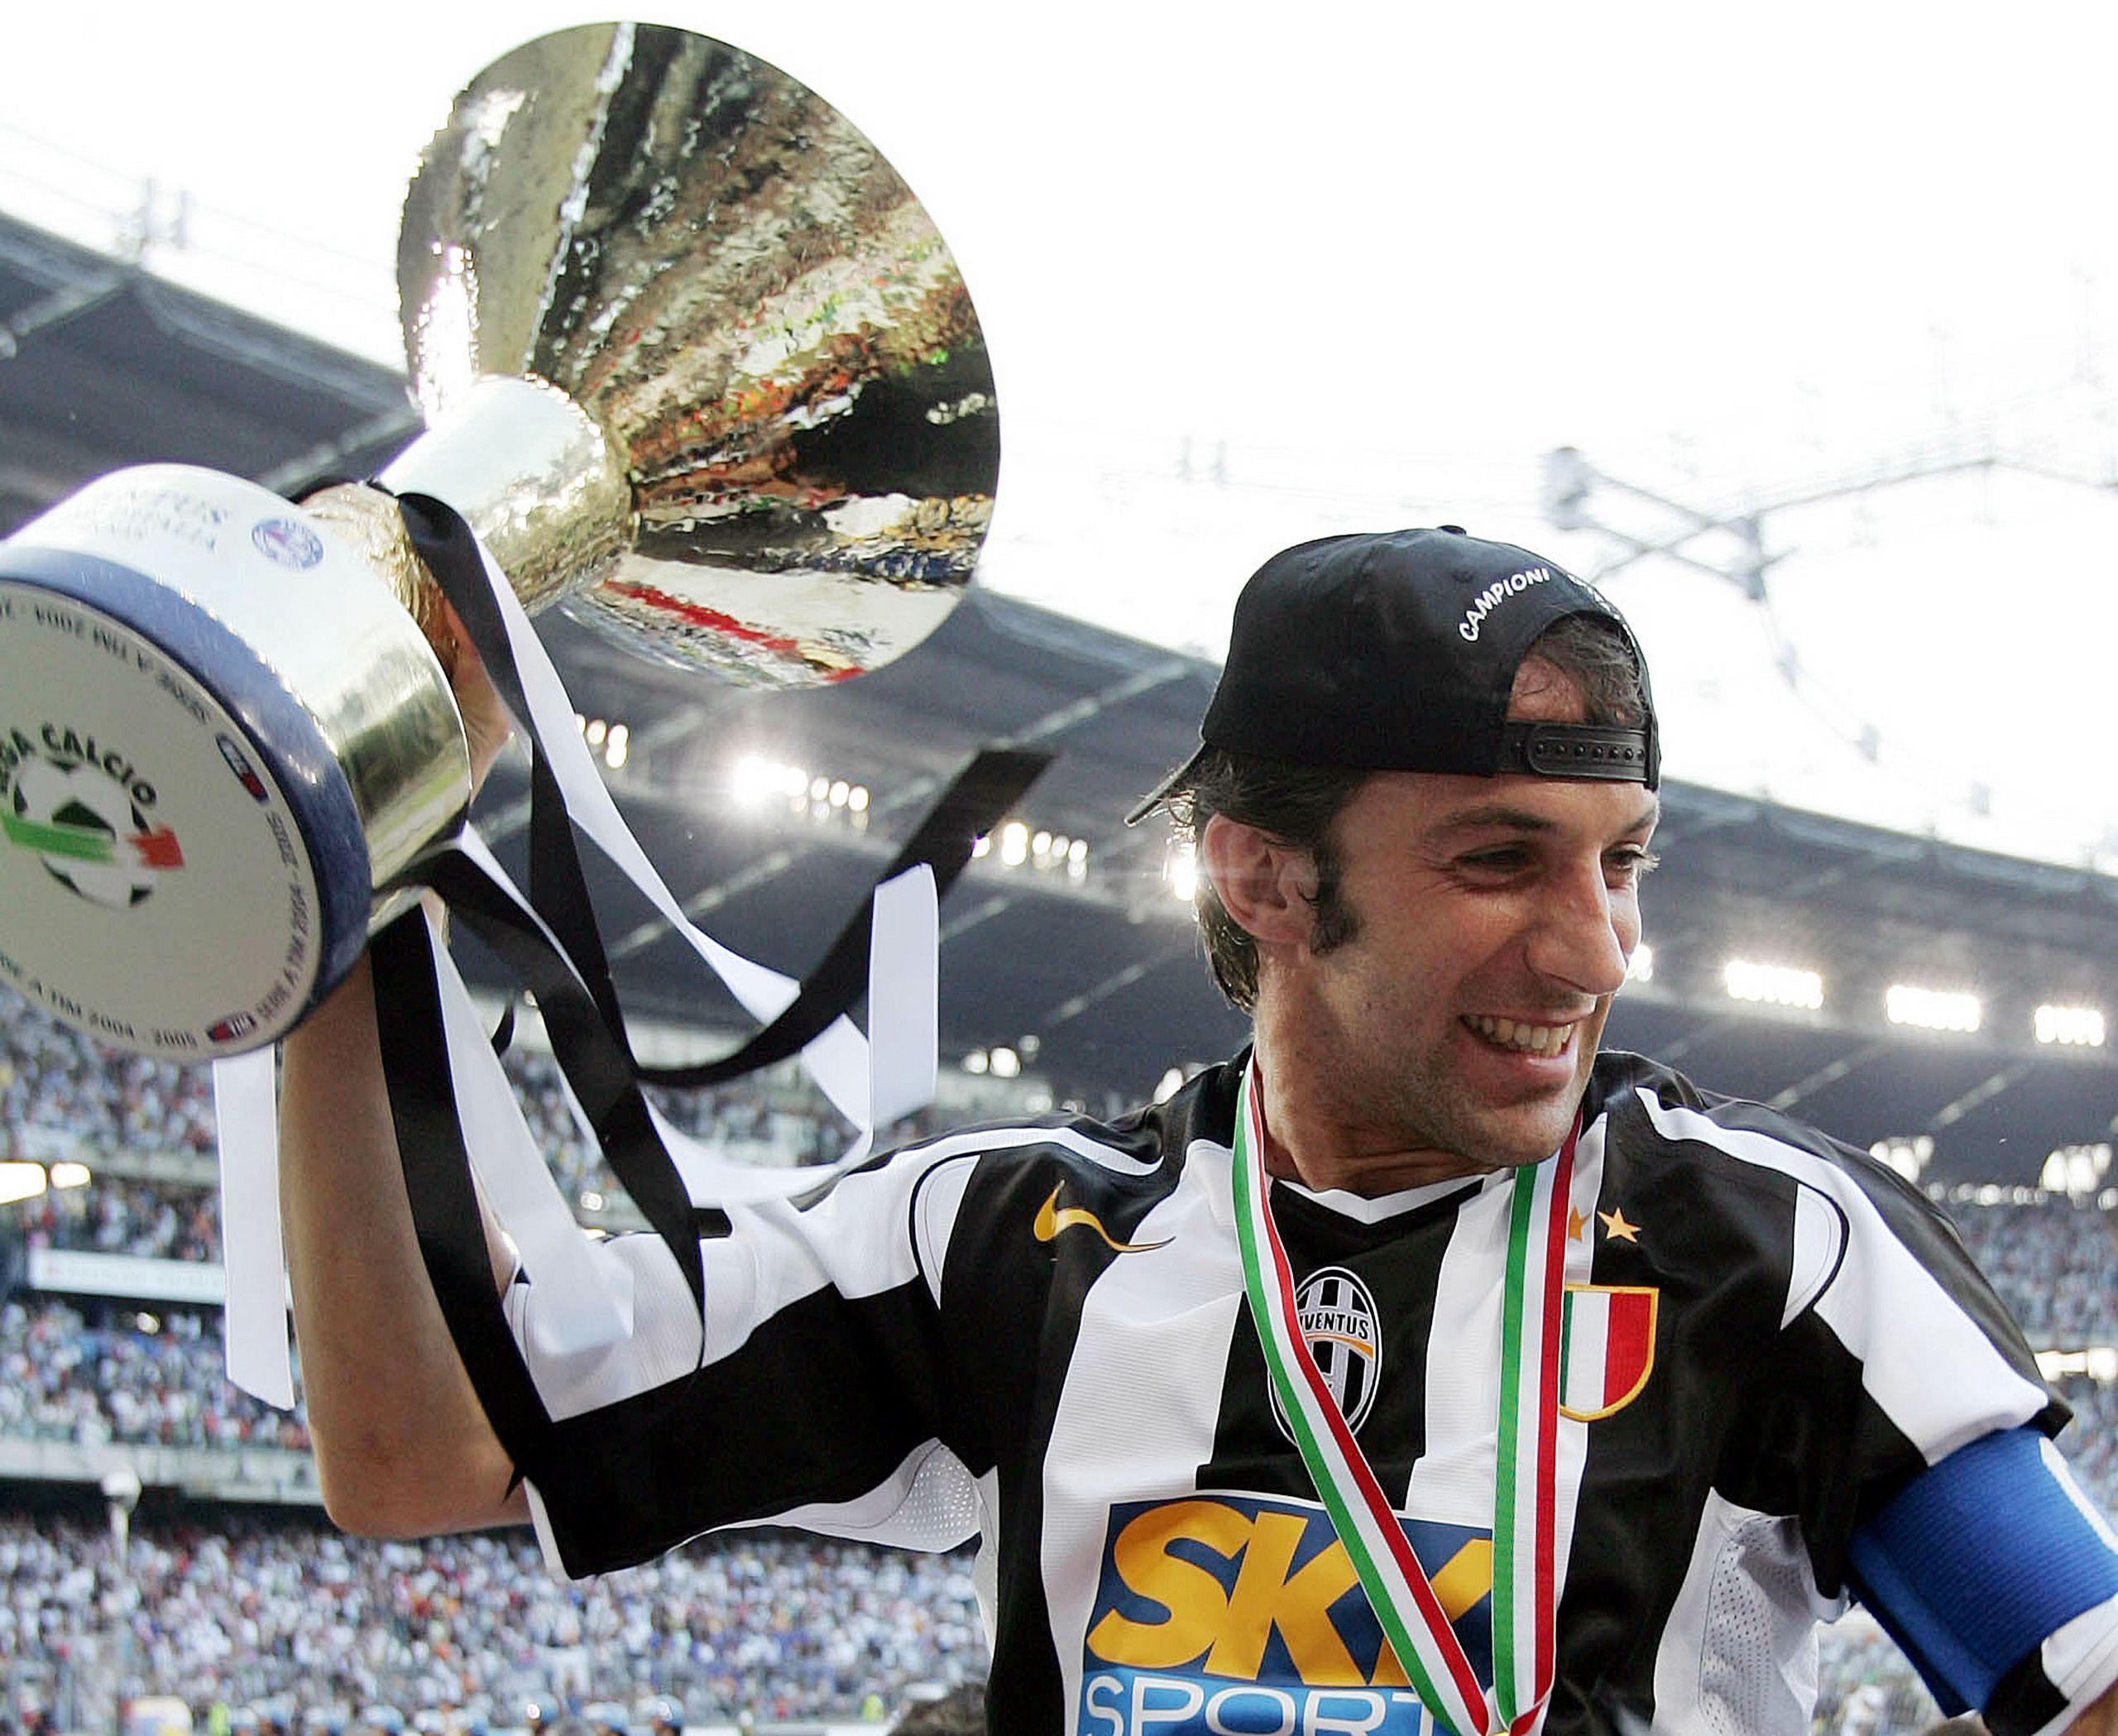 The football player of Sydney Alessandro Del Piero won the trophy